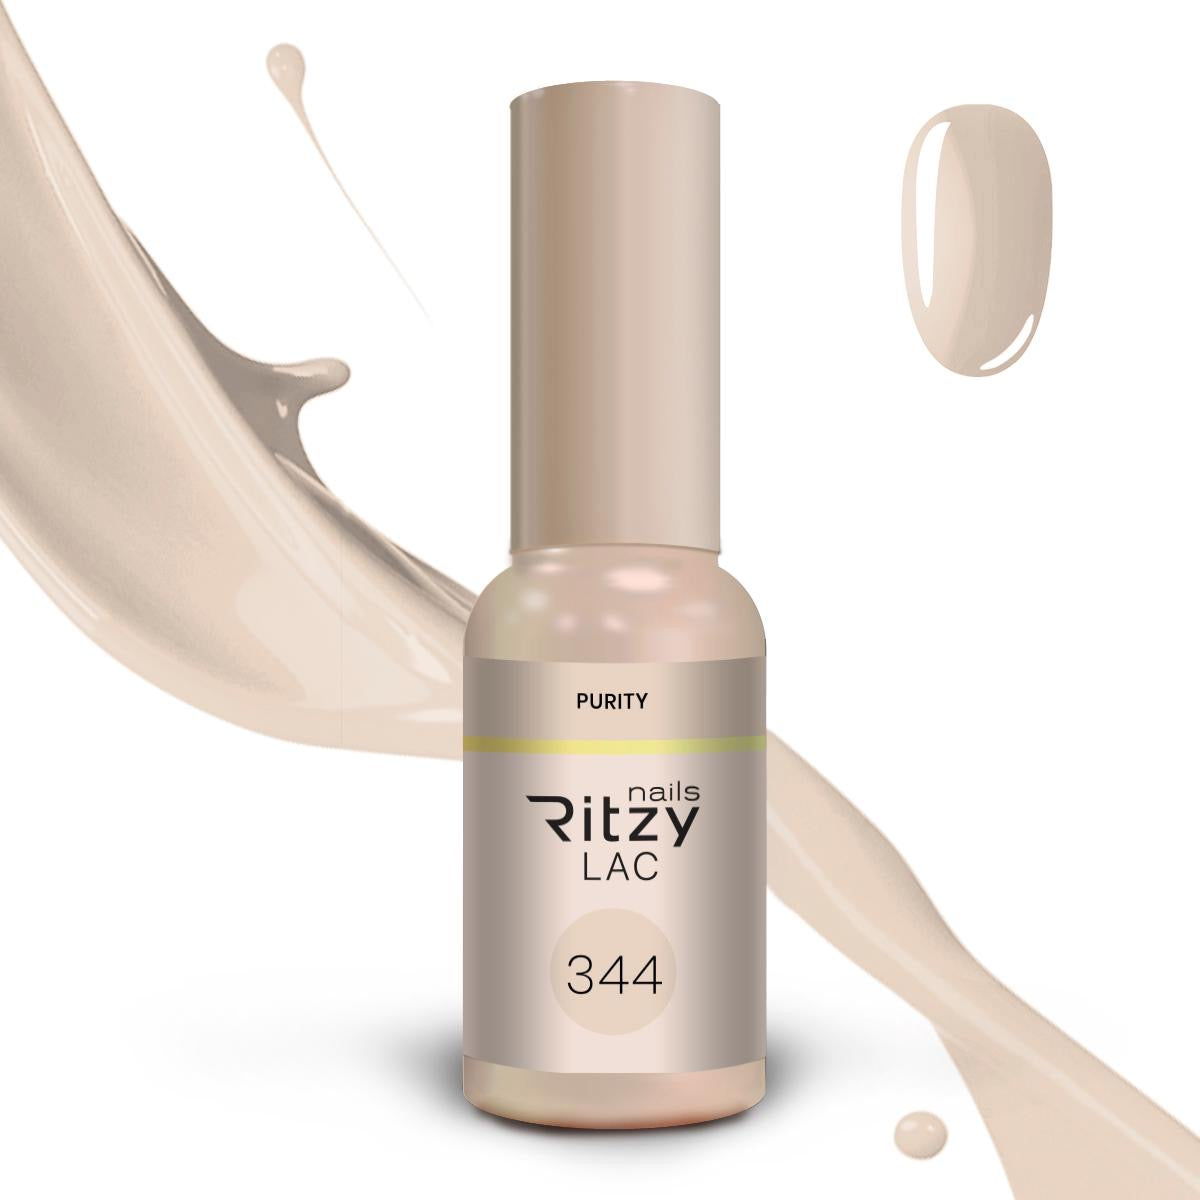 Ritzy Lac Purity Nr 344